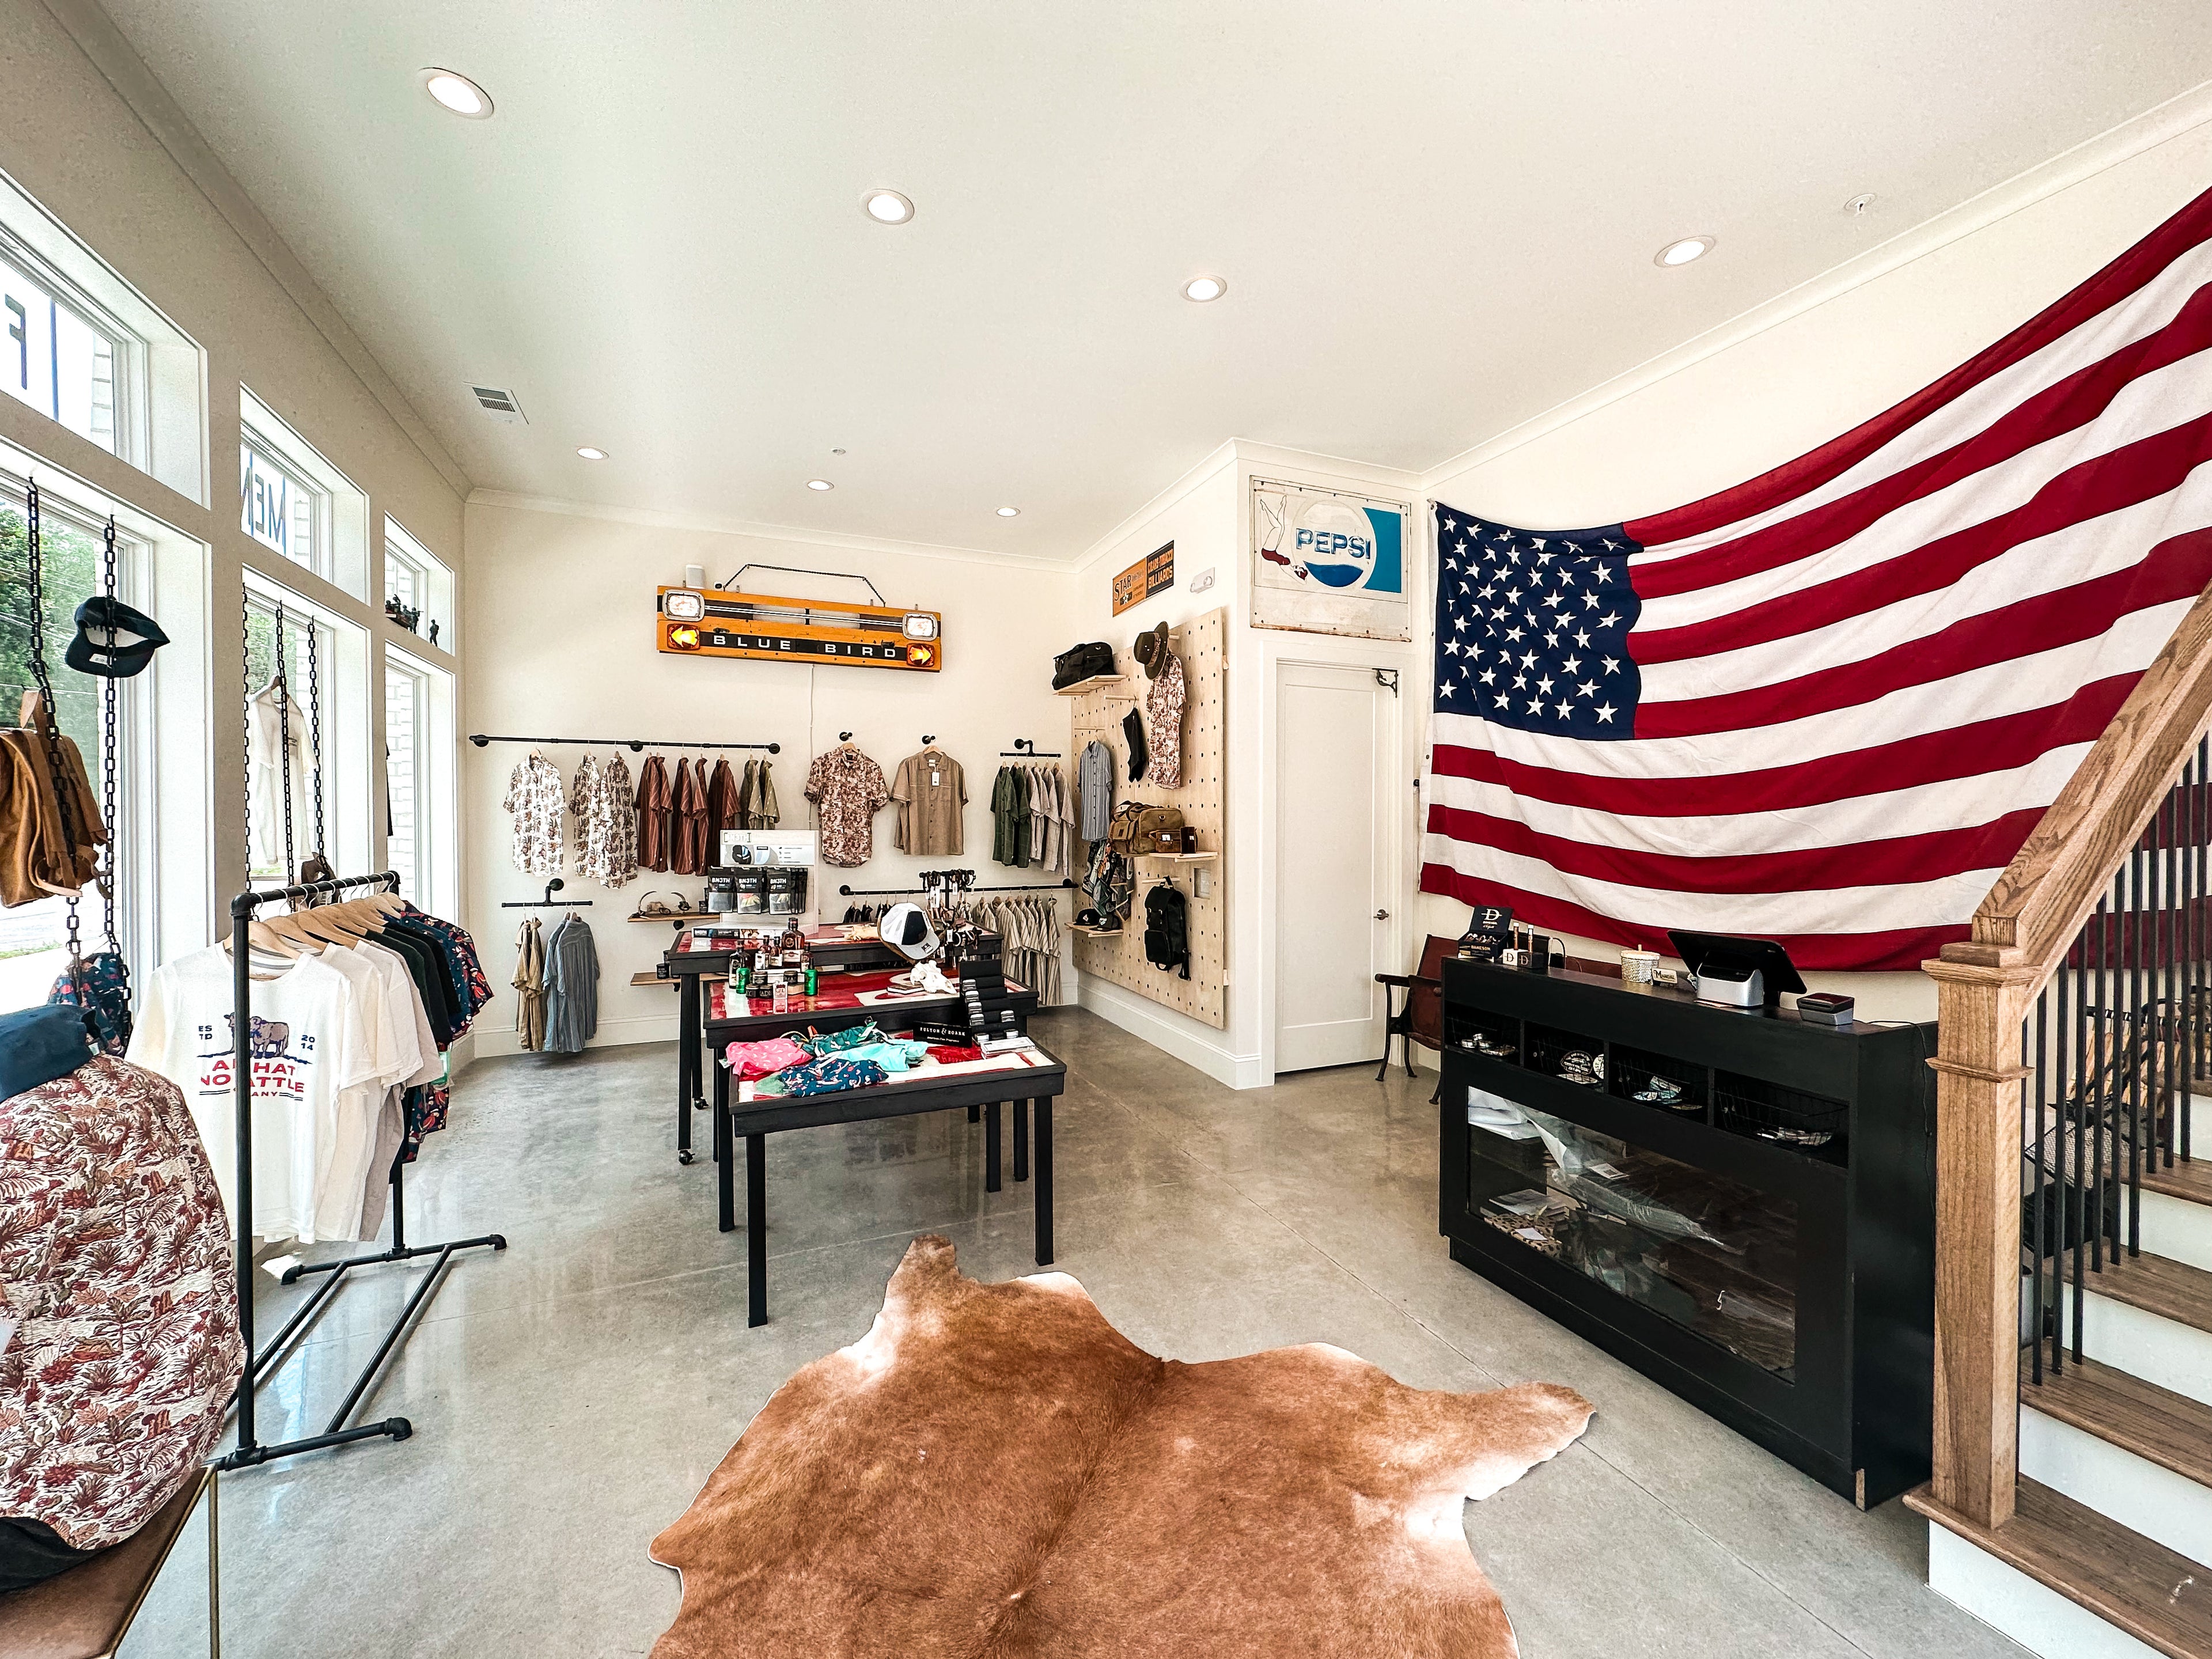 inside of The Manual Mens clothing shop in Woodstock, Georgia